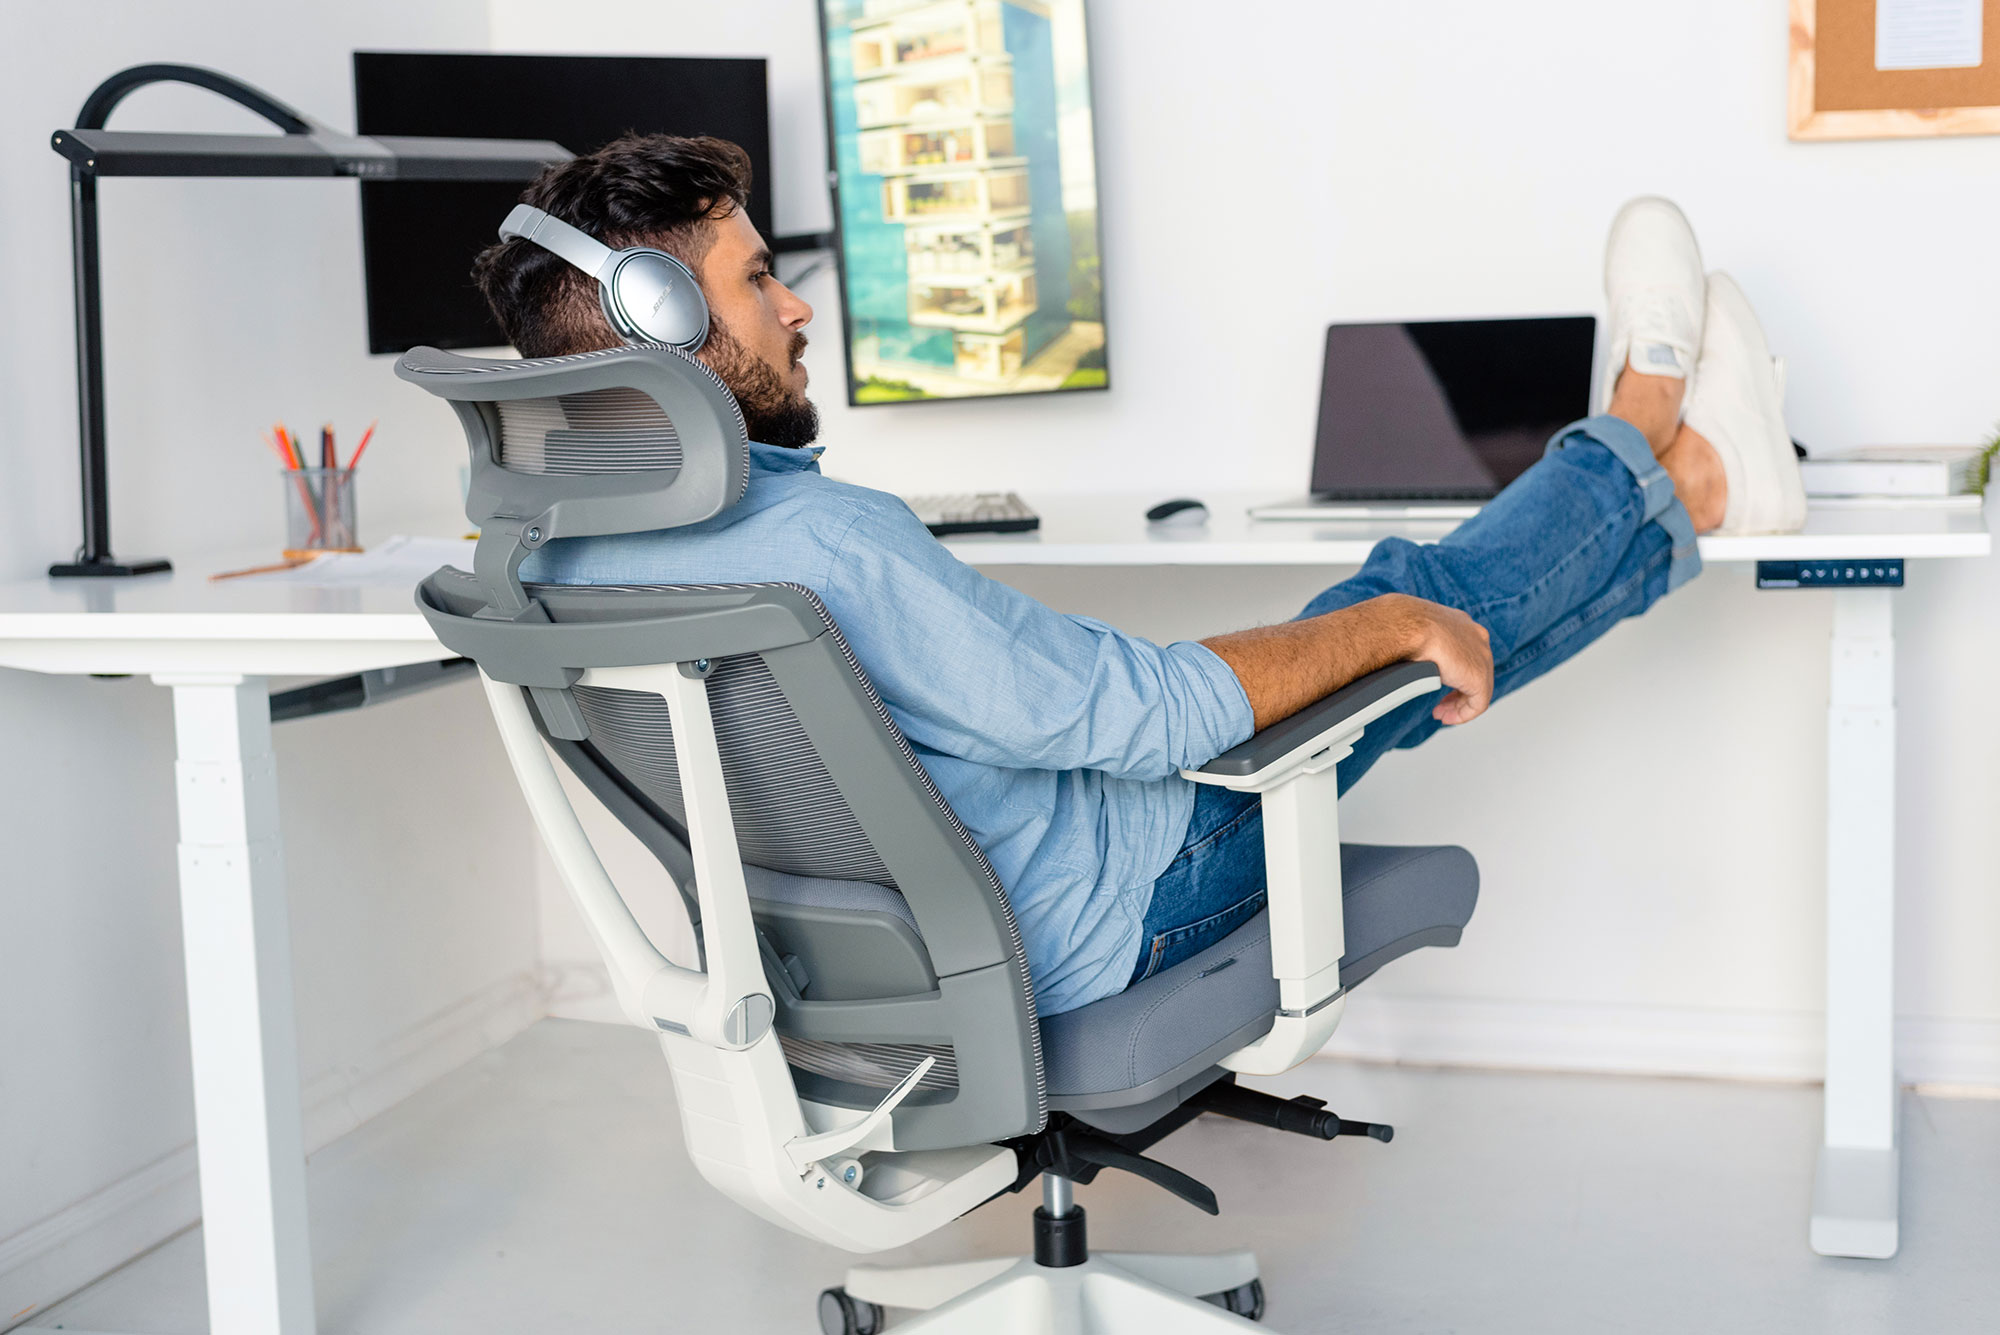 Ergochair Pro The Ergonomic Chair That Supports Your Entire Body